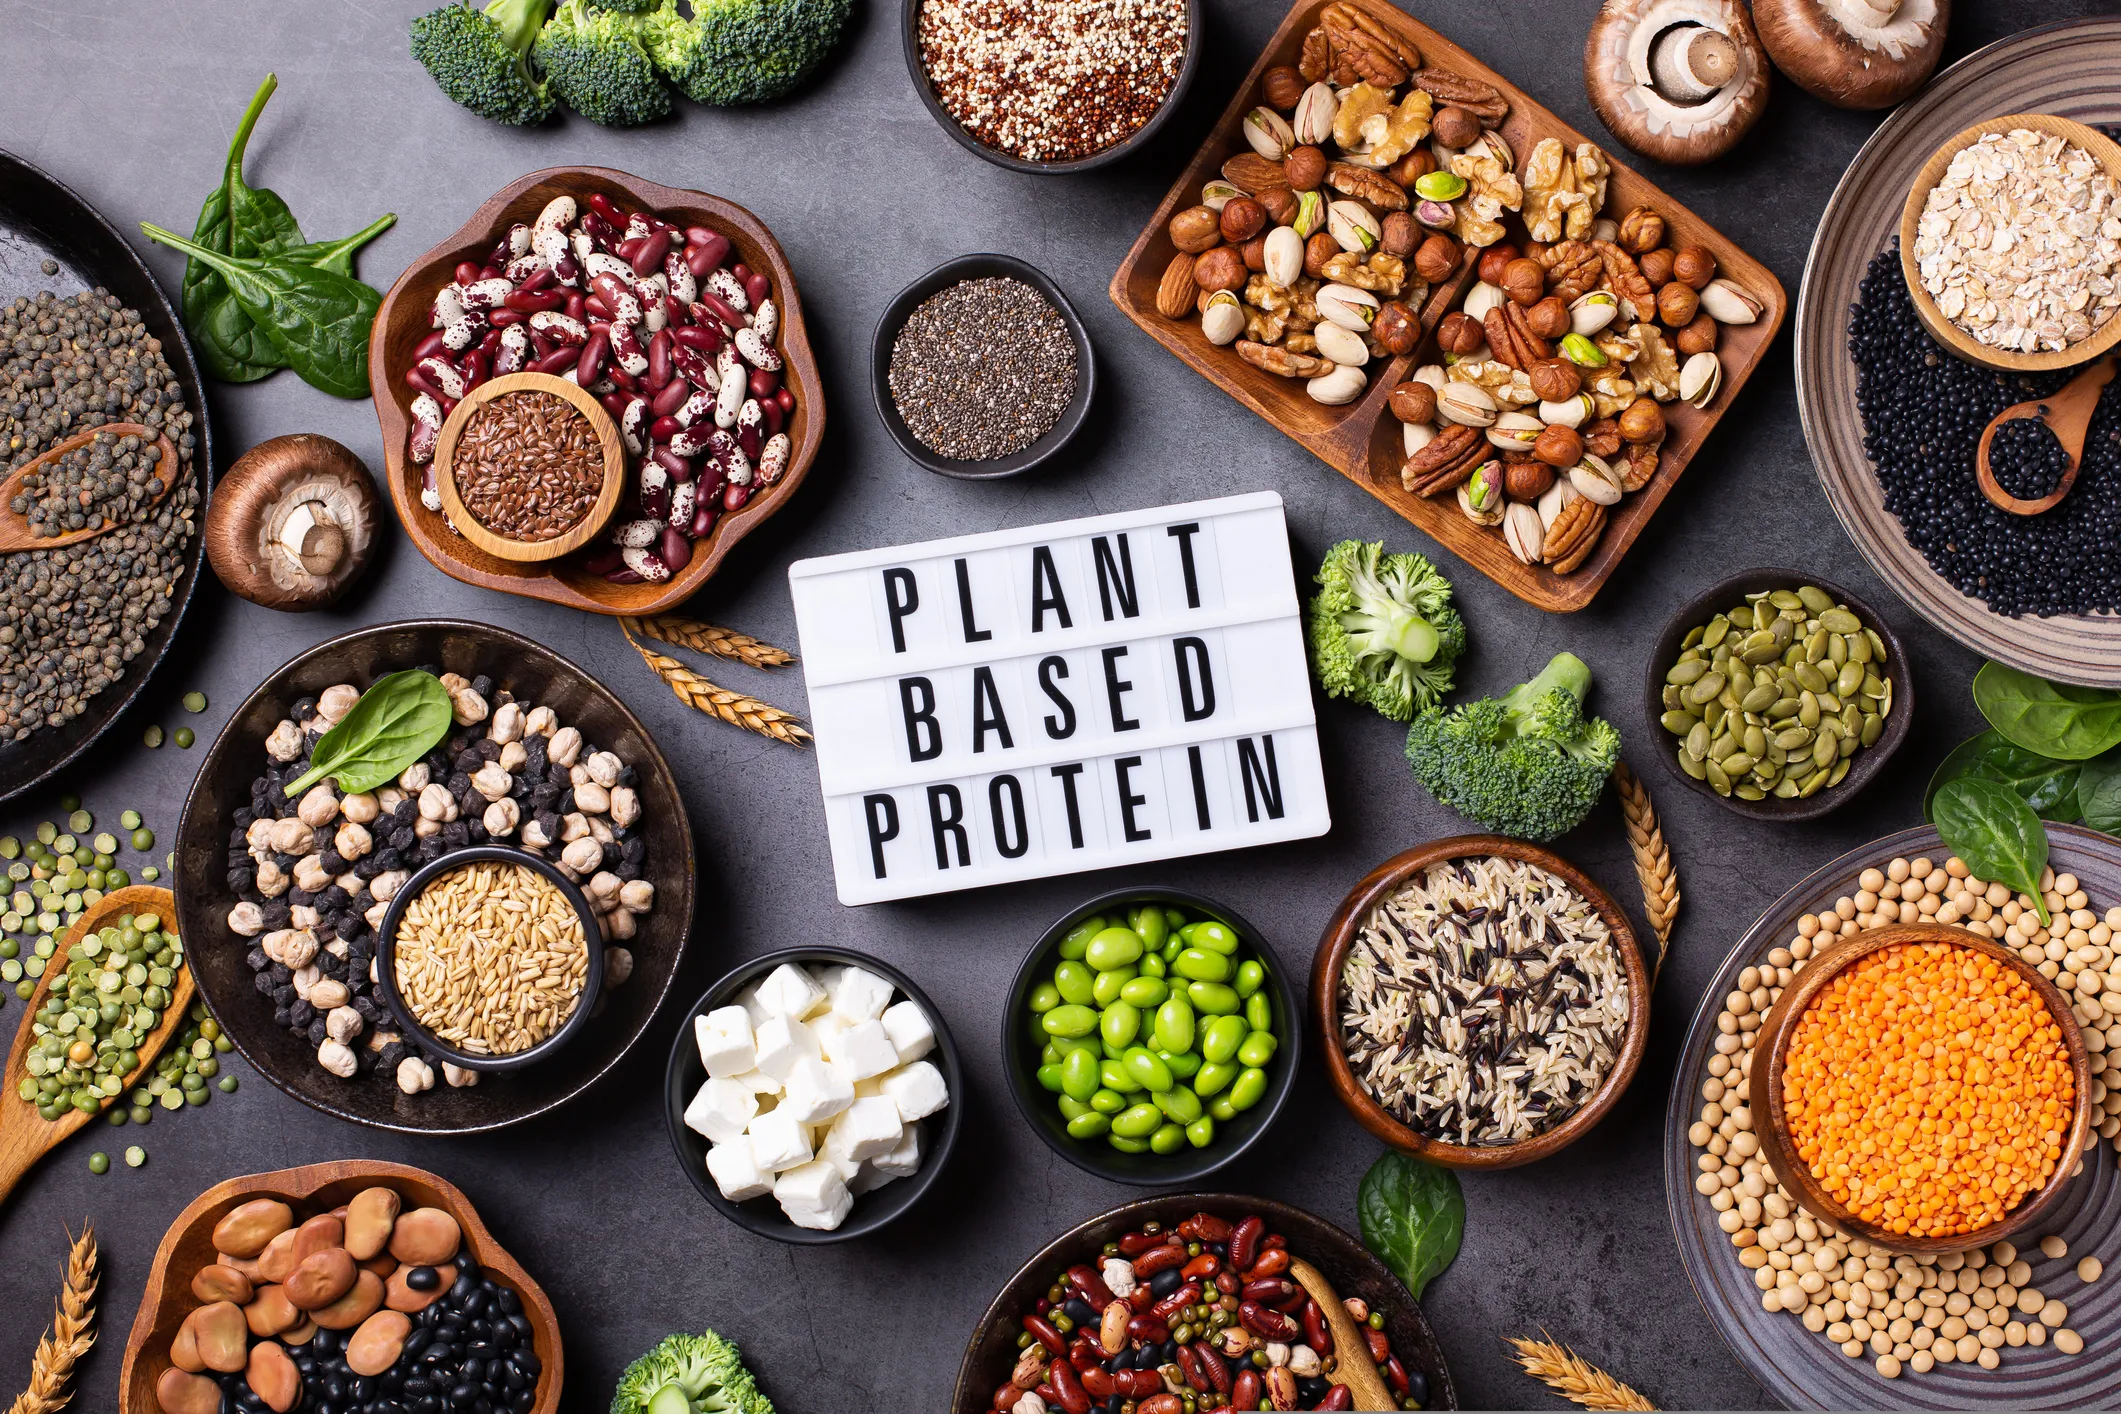 Plant-Based Proteins: Delicious Ways to Cook with Legumes